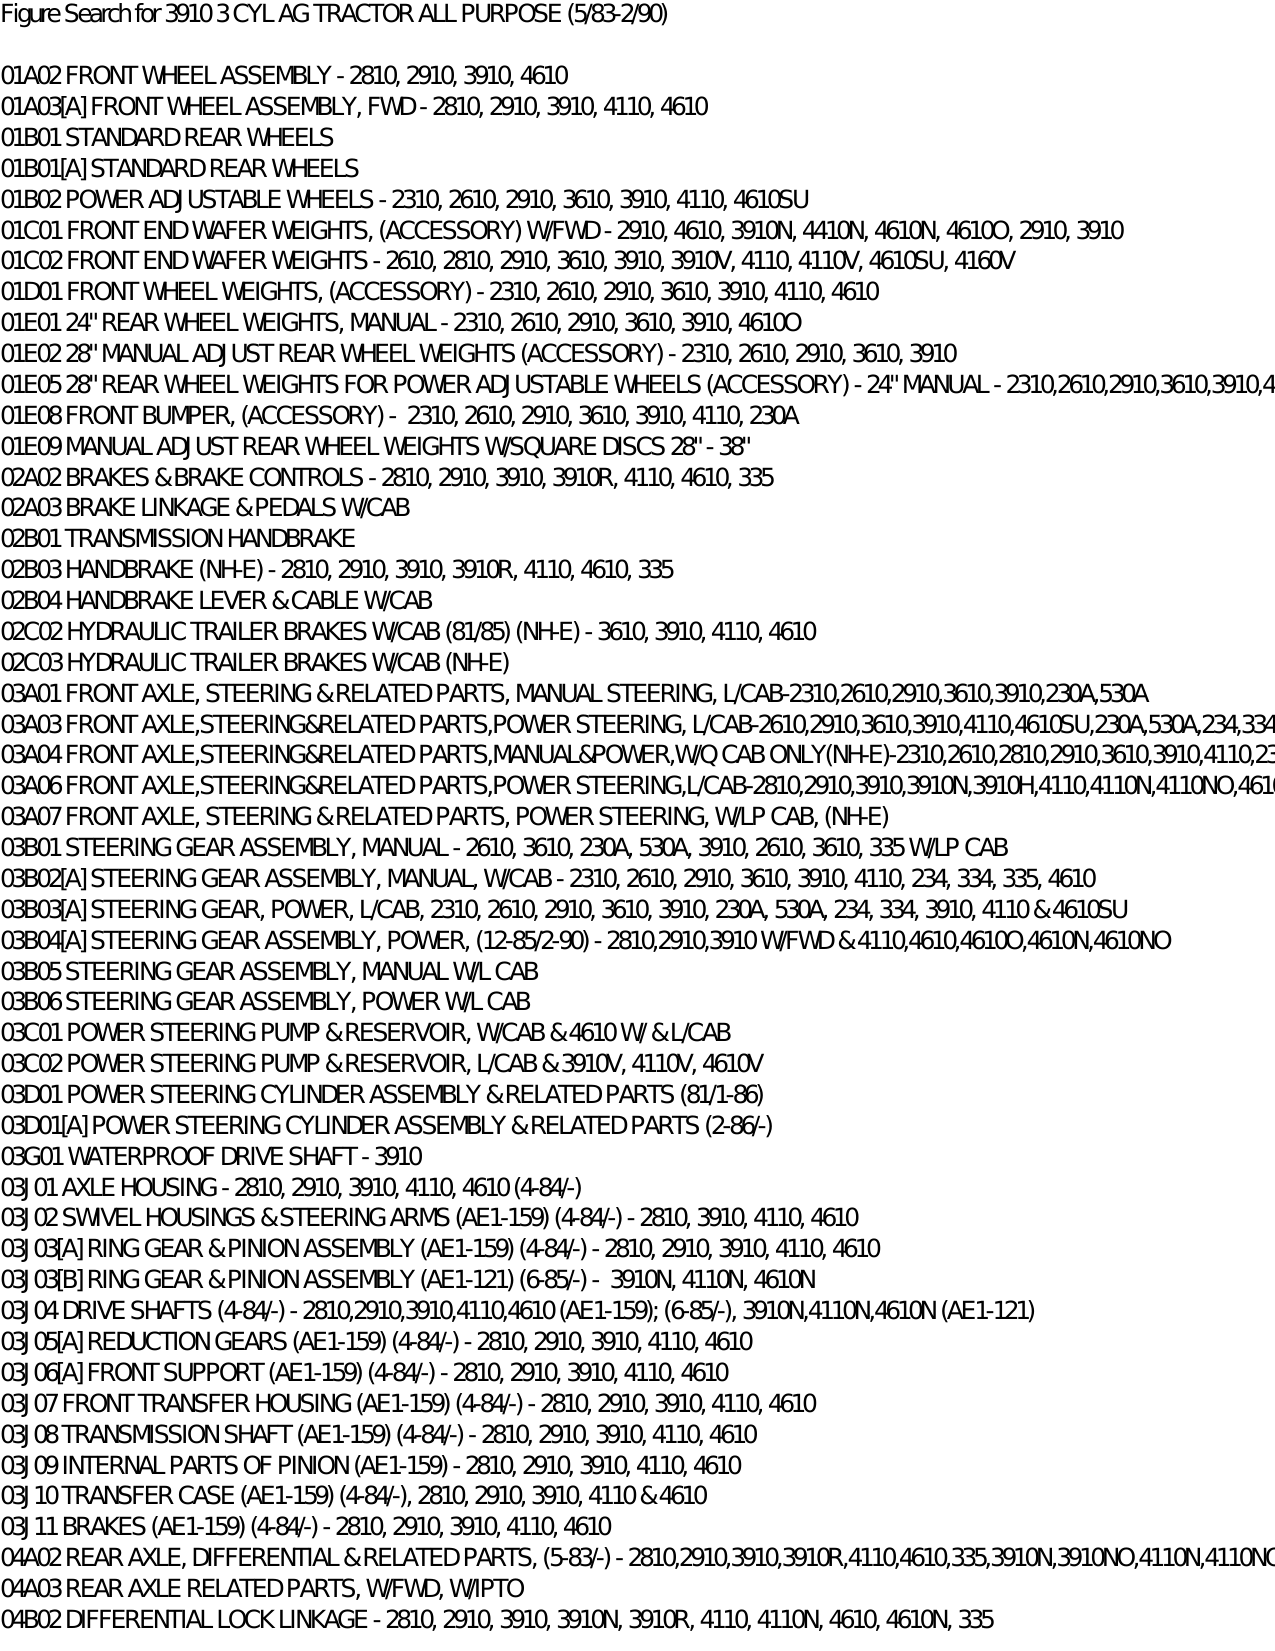 Ford 3910 tractor parts list Preview image 3